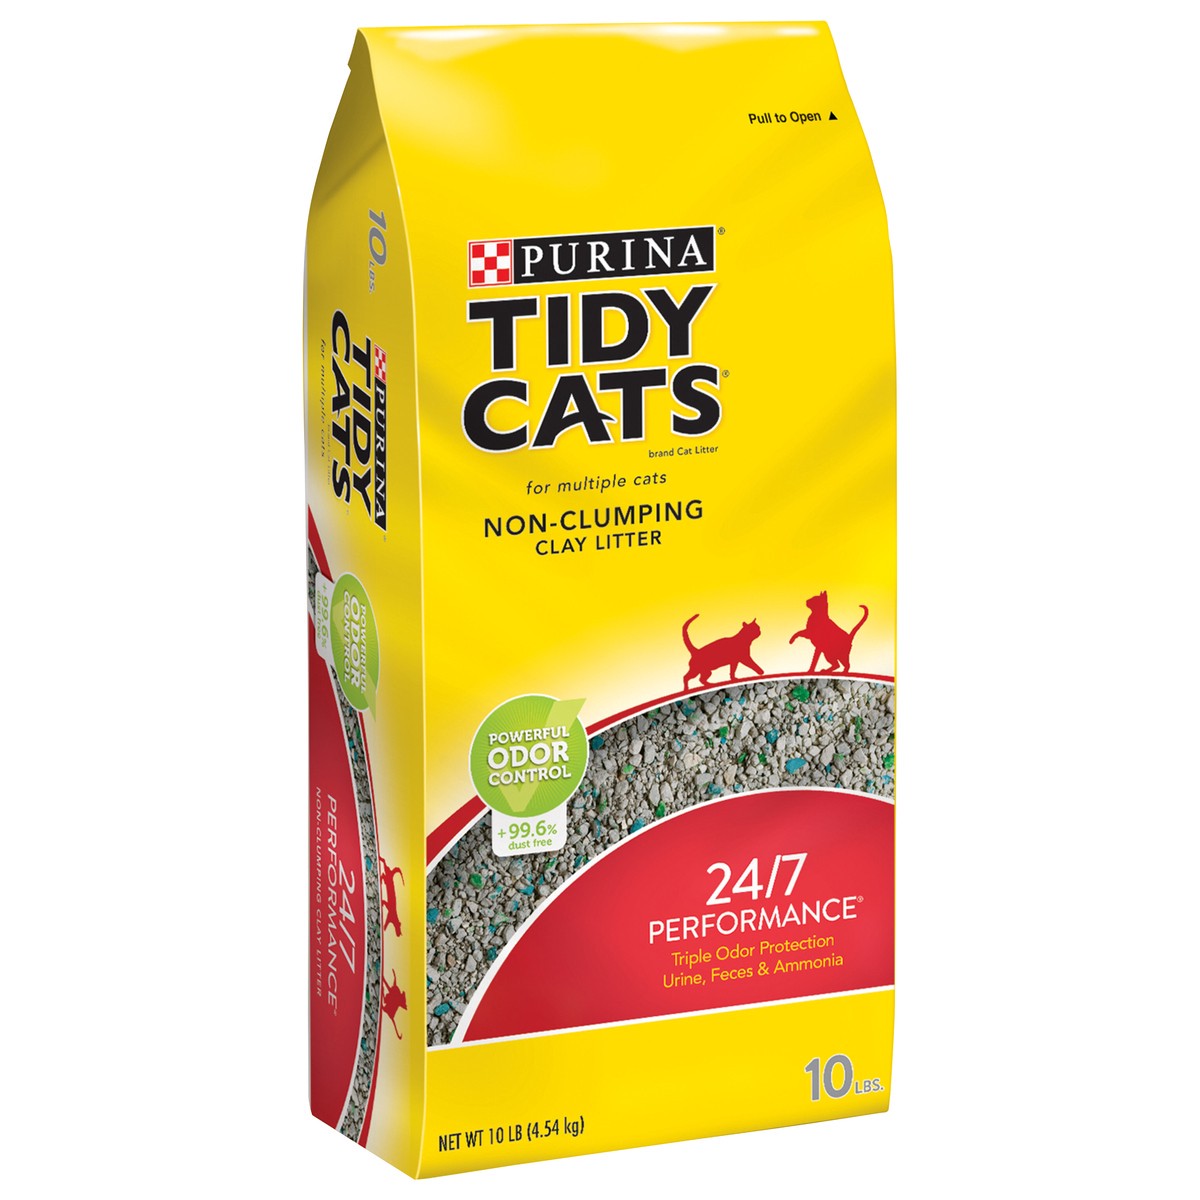 slide 5 of 9, Tidy Cats Purina Tidy Cats Non Clumping Cat Litter, 24/7 Performance Multi Cat Litter, 10 lb